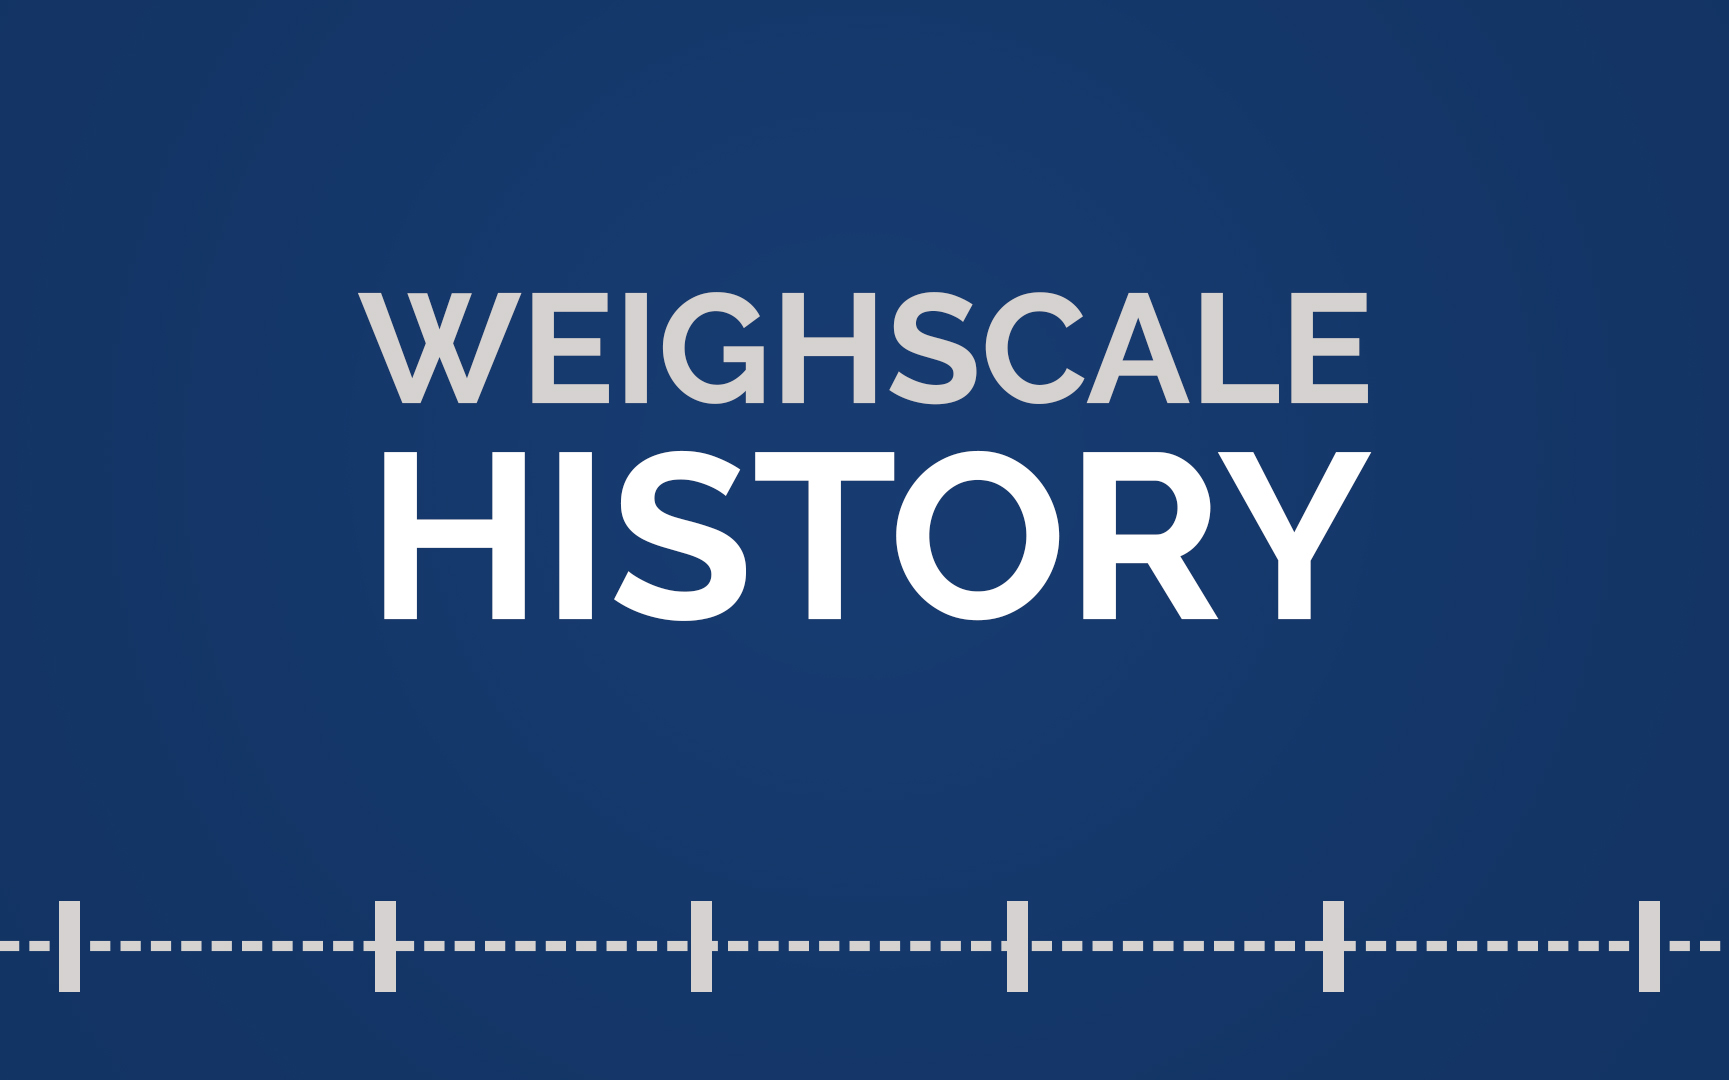 Weighing scale - Simple English Wikipedia, the free encyclopedia